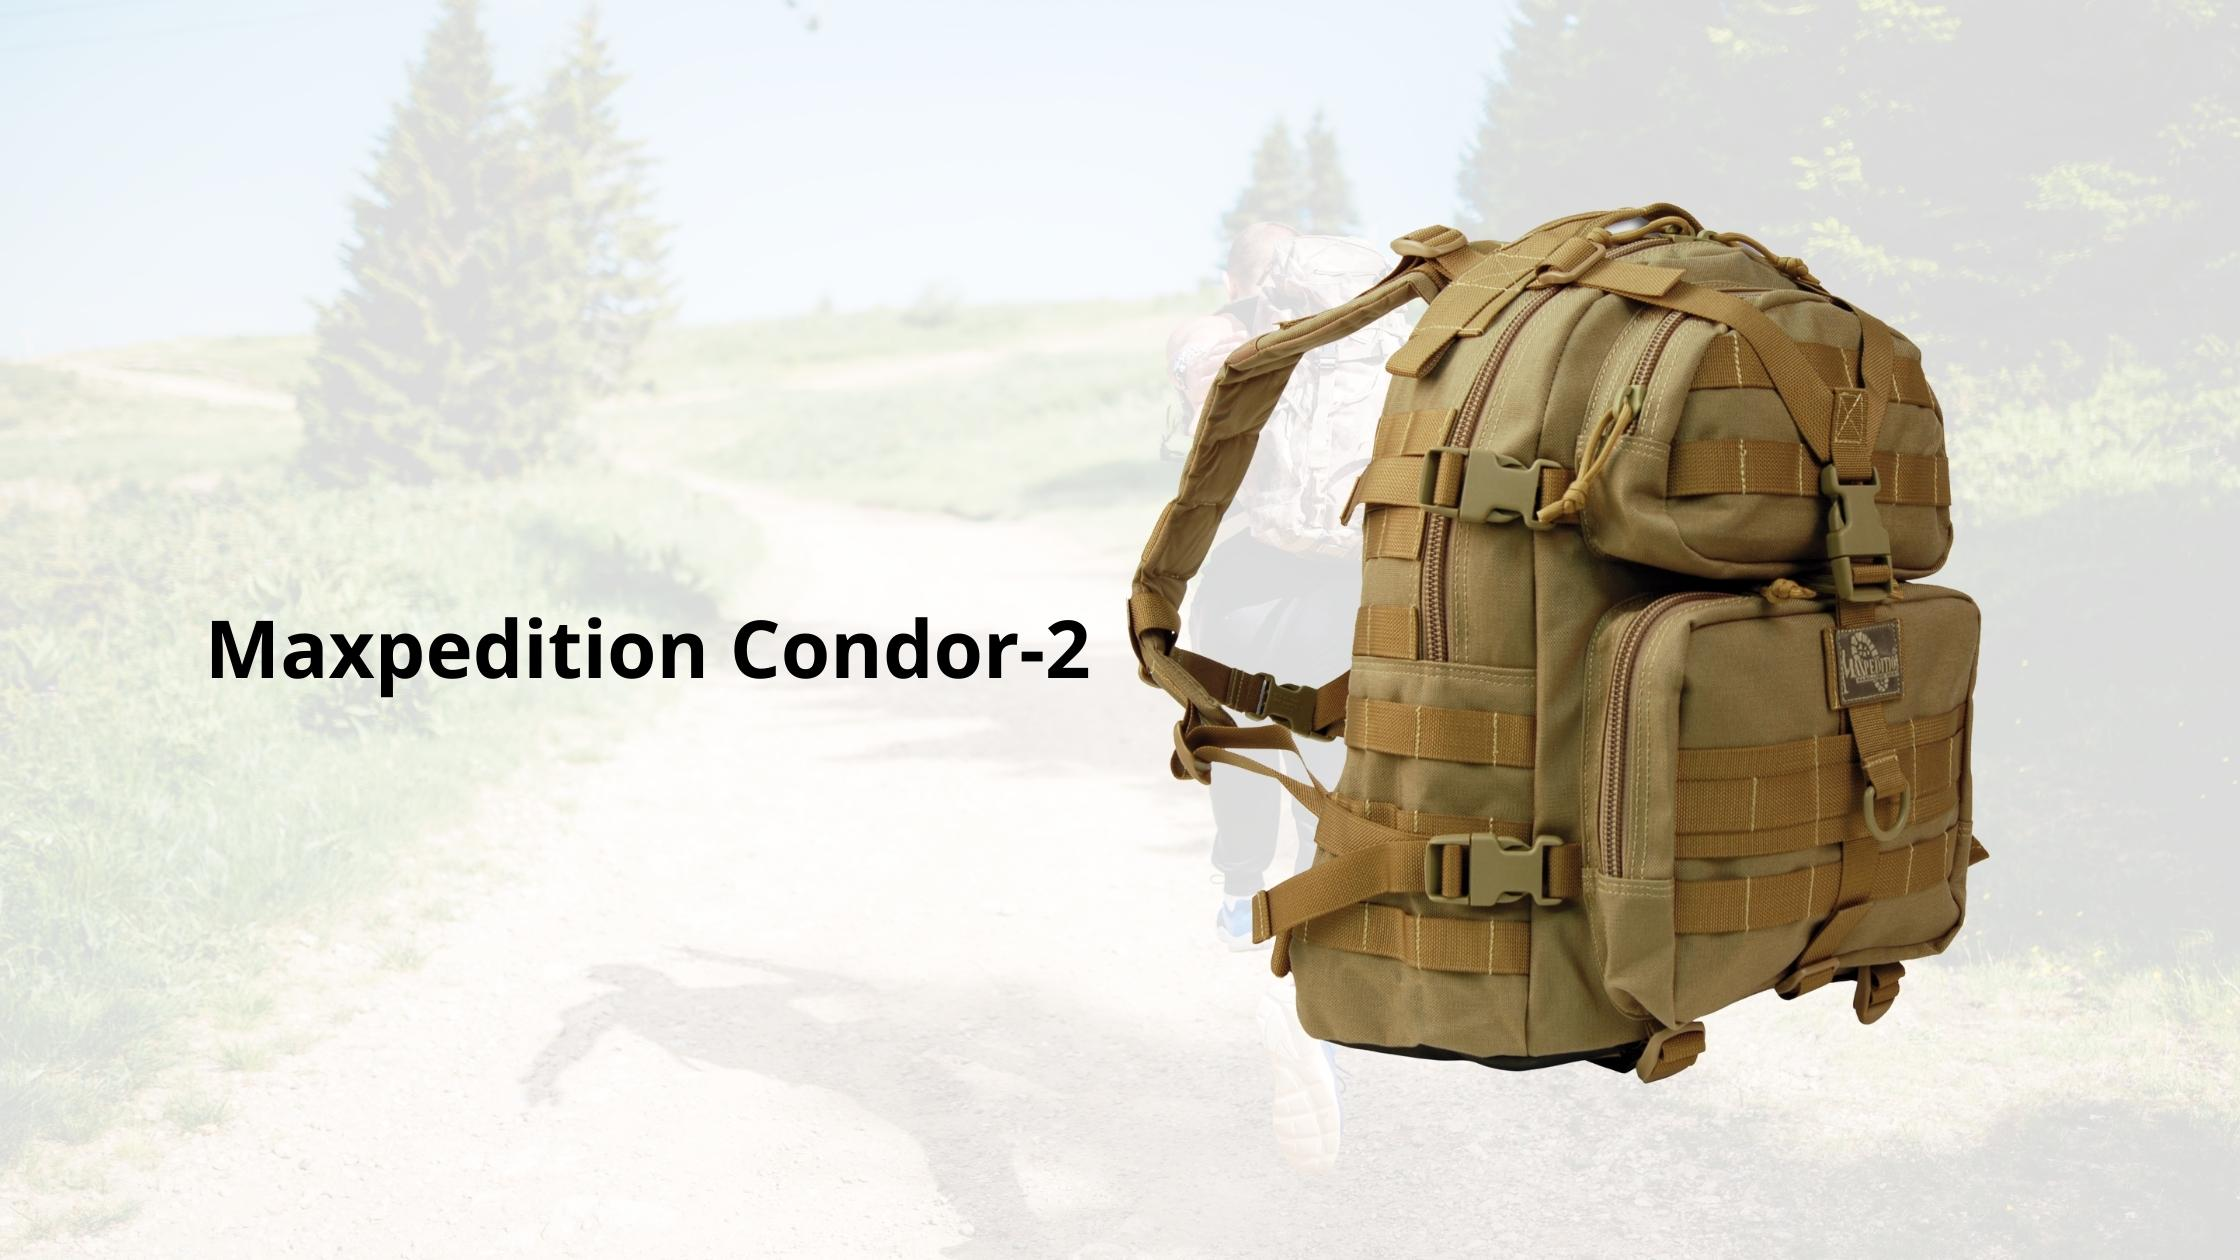 Maxpedition Condor-2 for everyday carry